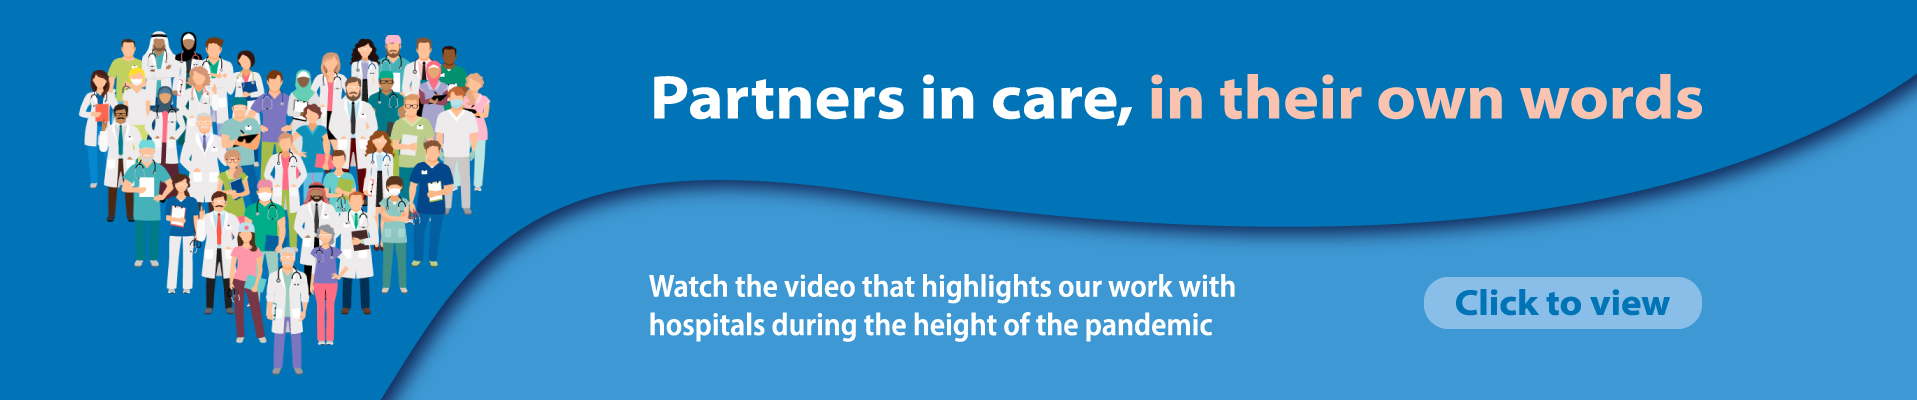 Partners in Care Video